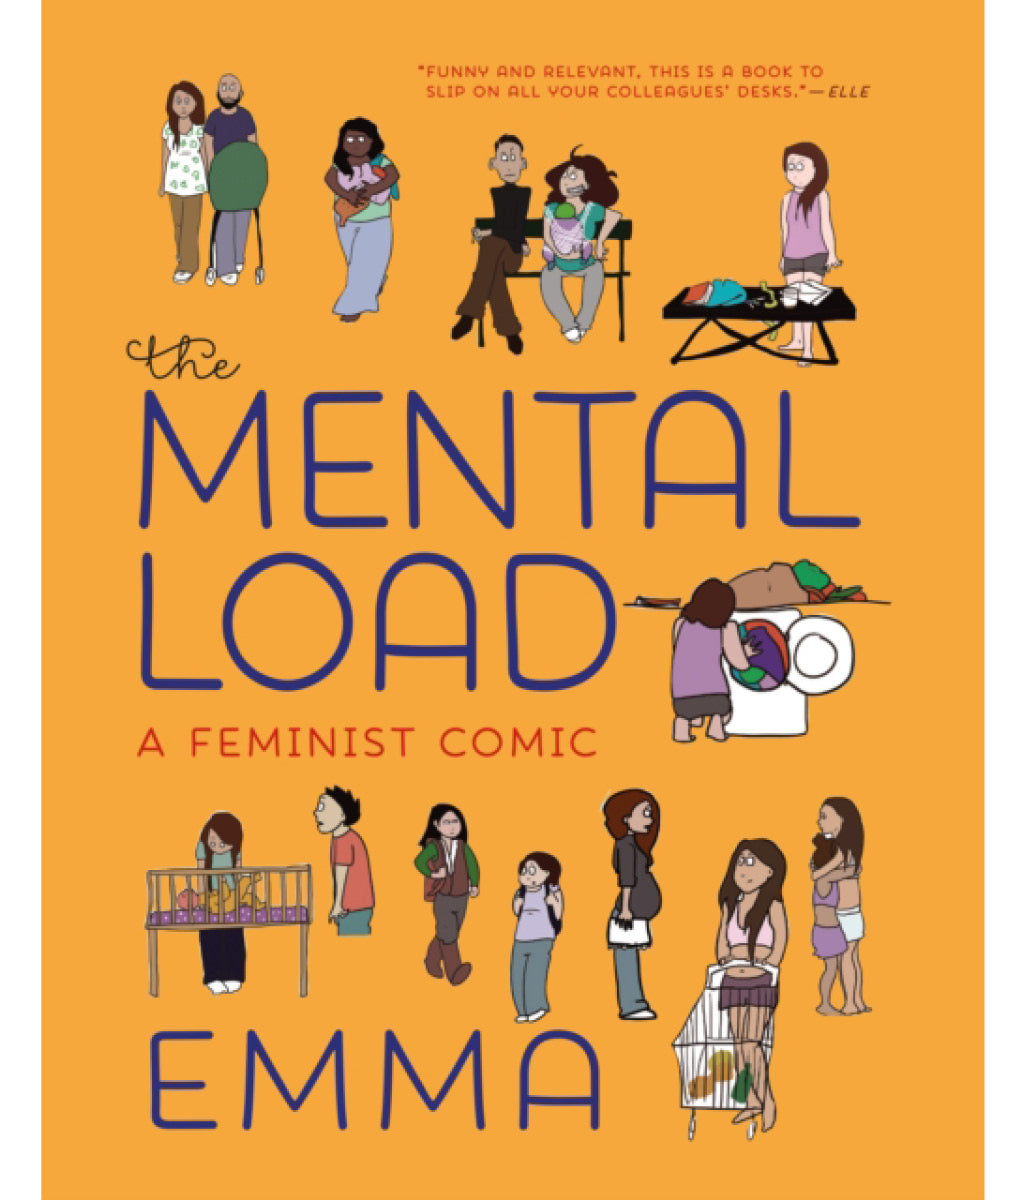 The Mental Load by EMMA